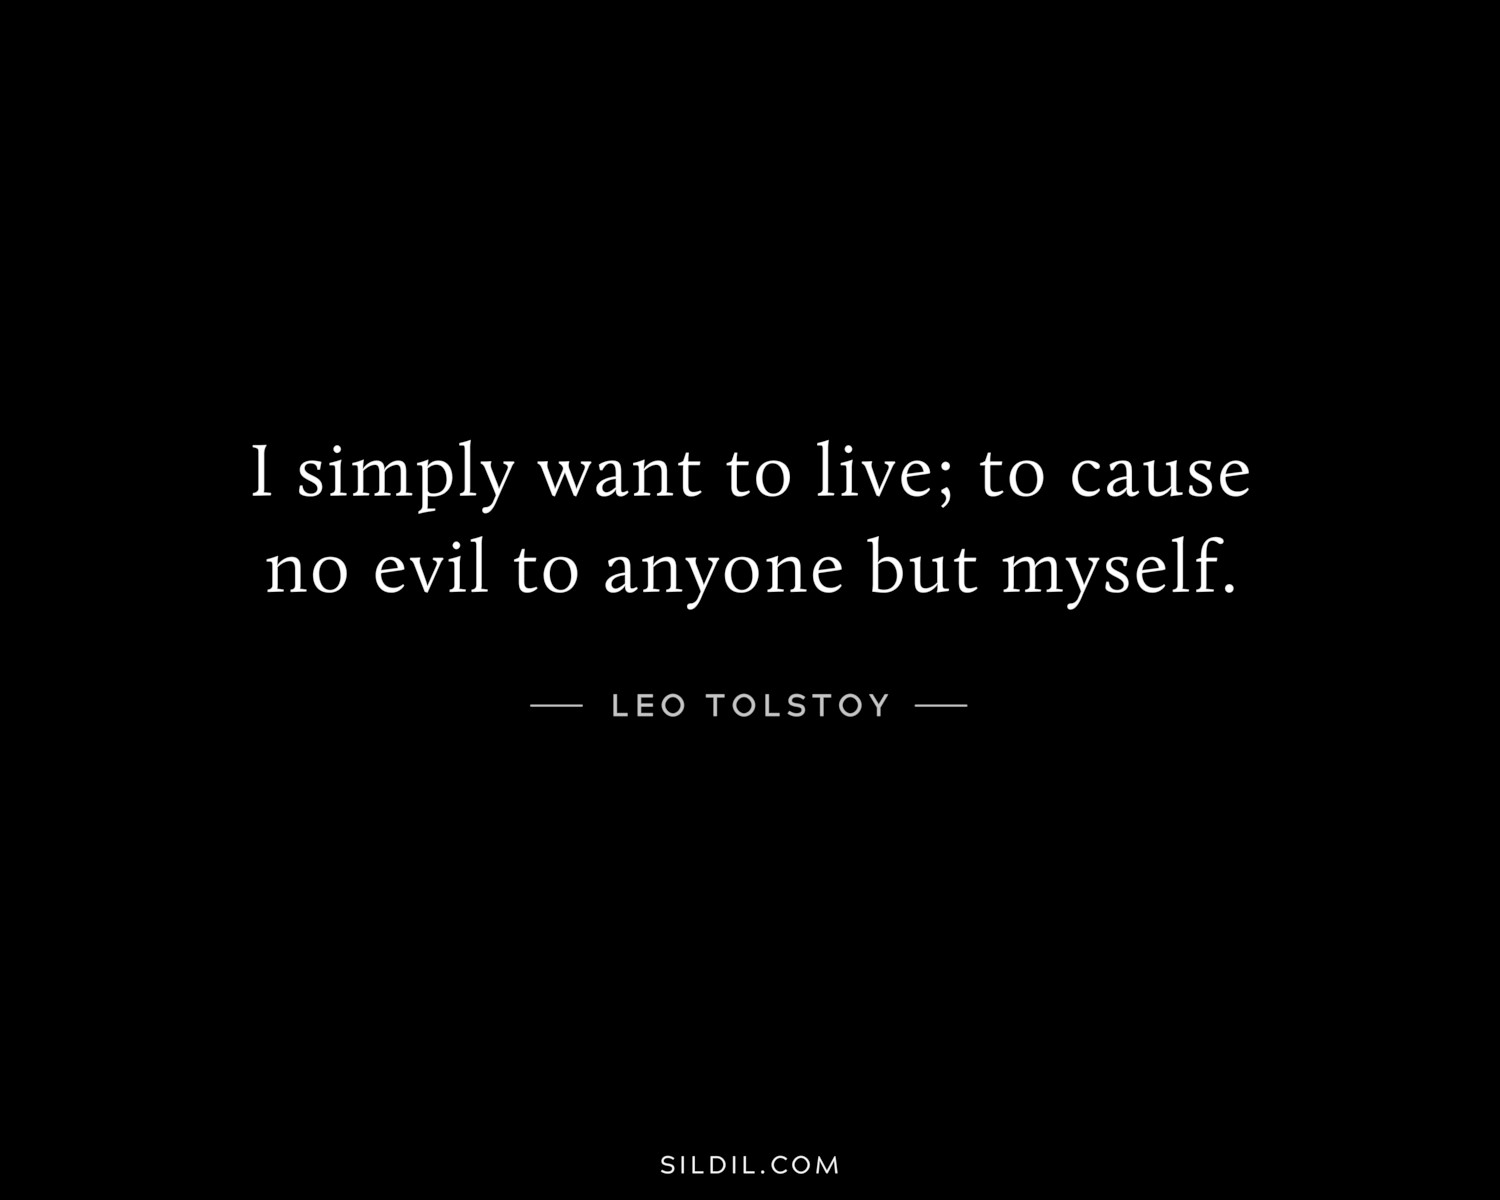 I simply want to live; to cause no evil to anyone but myself.